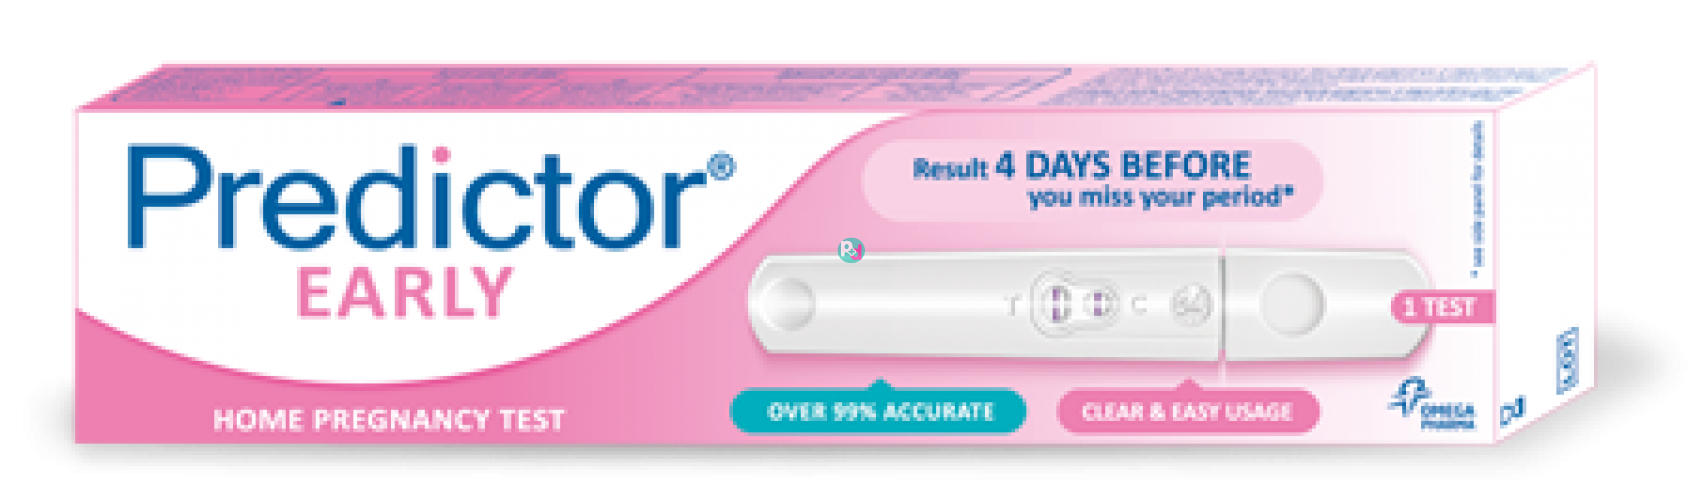 Predictor Early 1TMX - Early pregnancy test